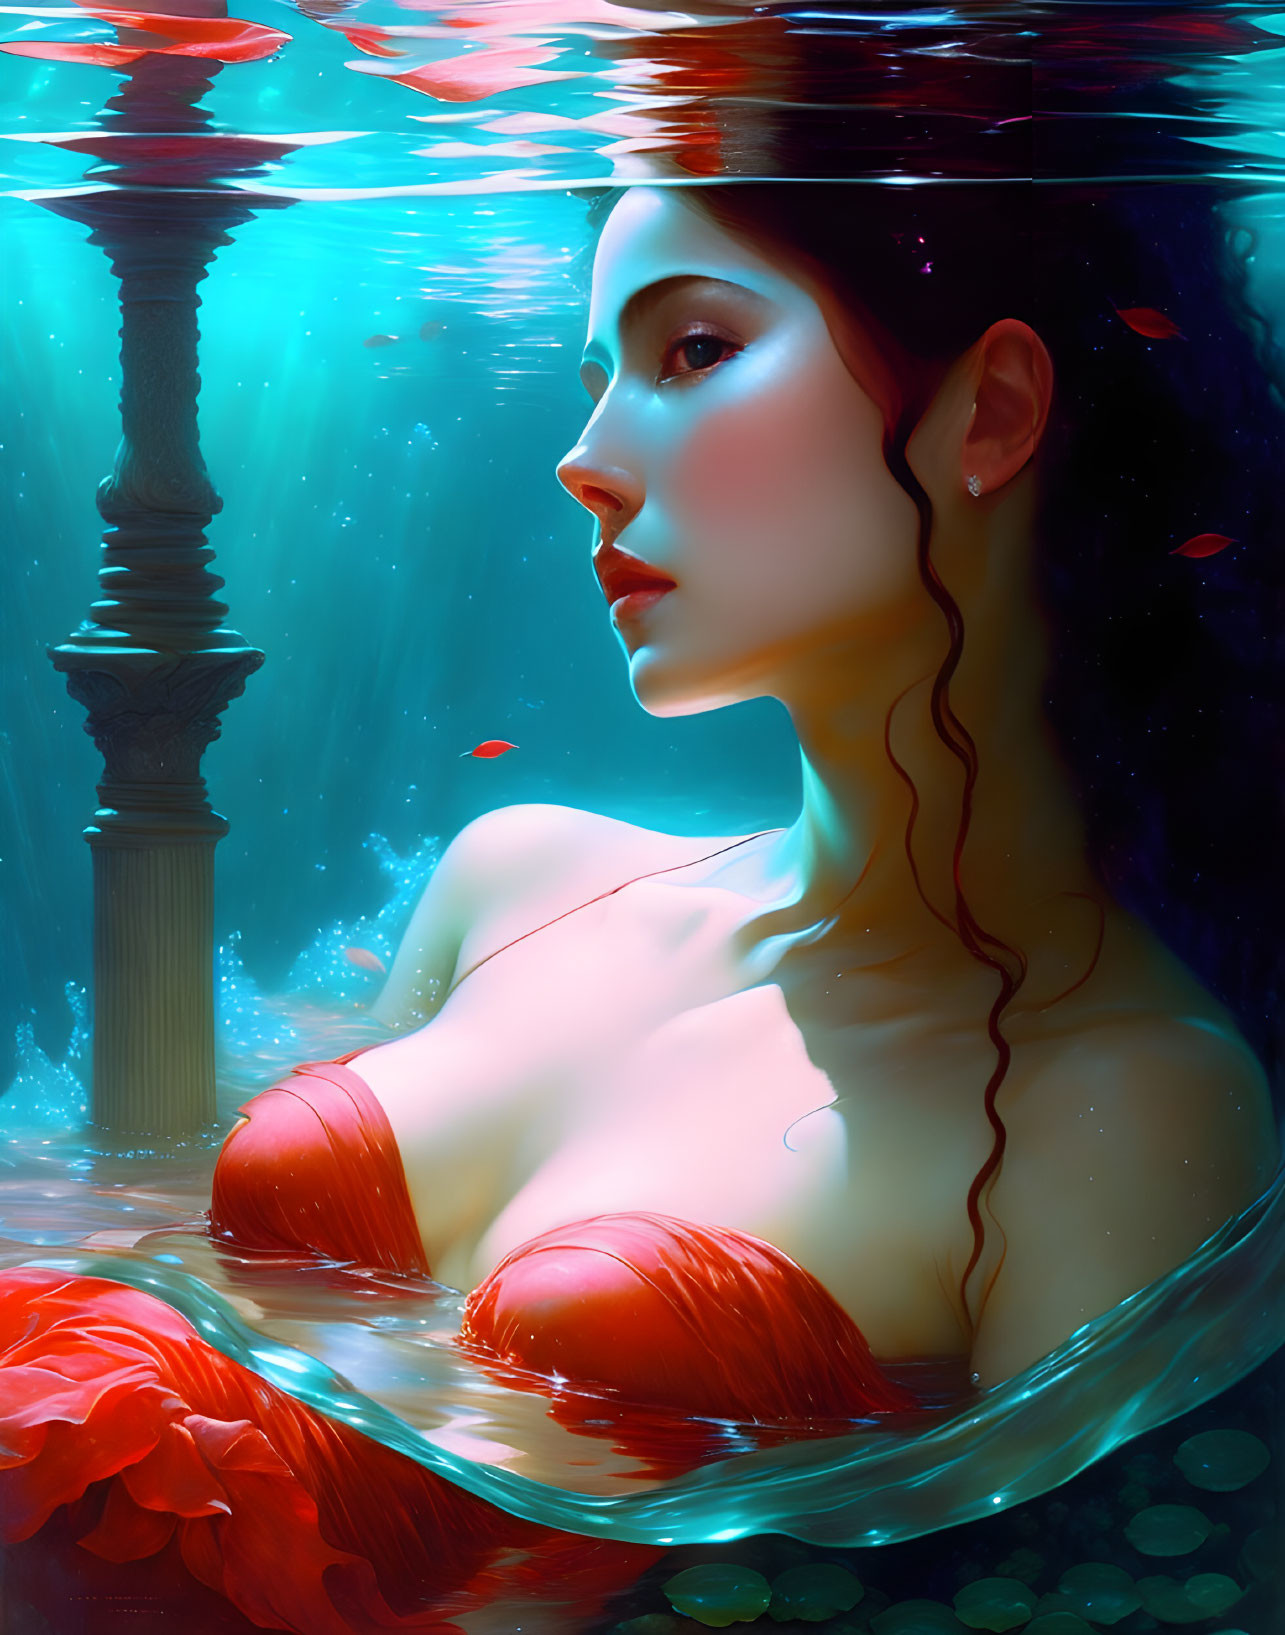 Surreal portrait of woman in water with classical architecture and red accents